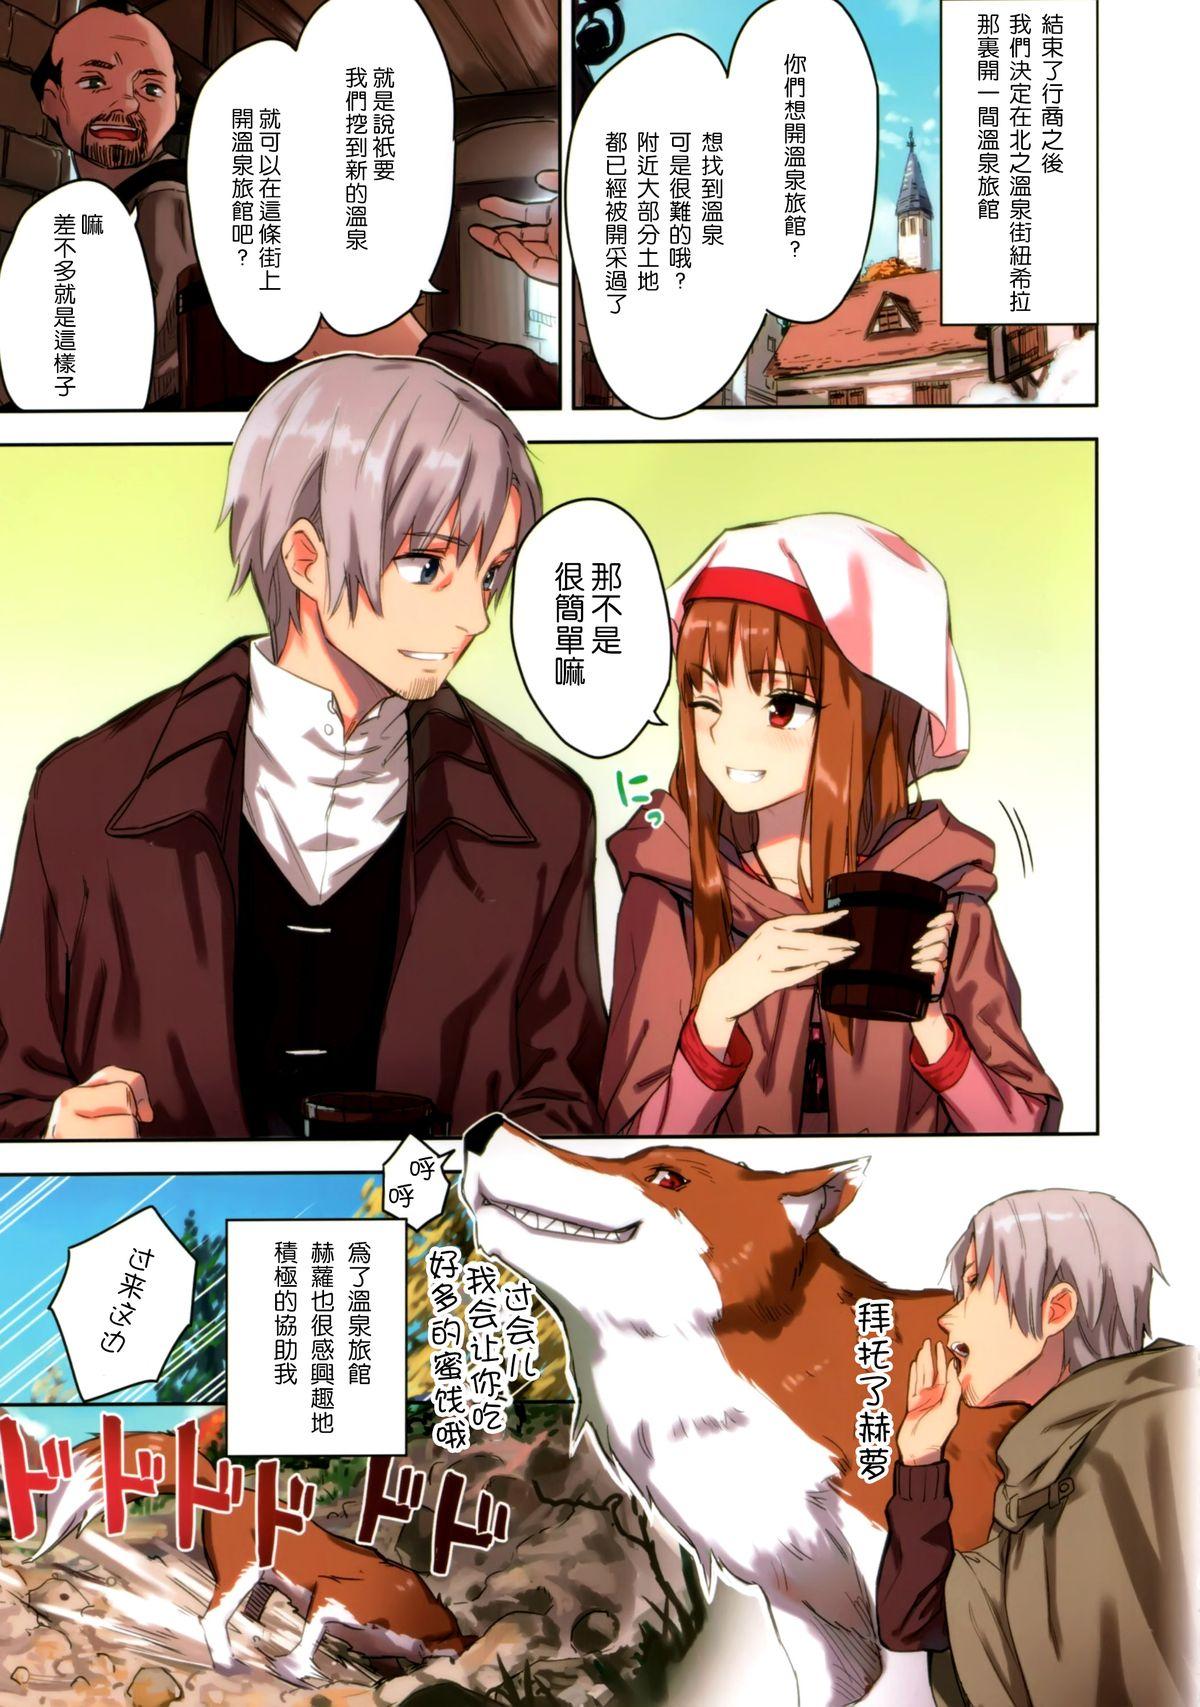 Hardcorend Wacchi to Nyohhira Bon FULL COLOR - Spice and wolf Huge Boobs - Page 6